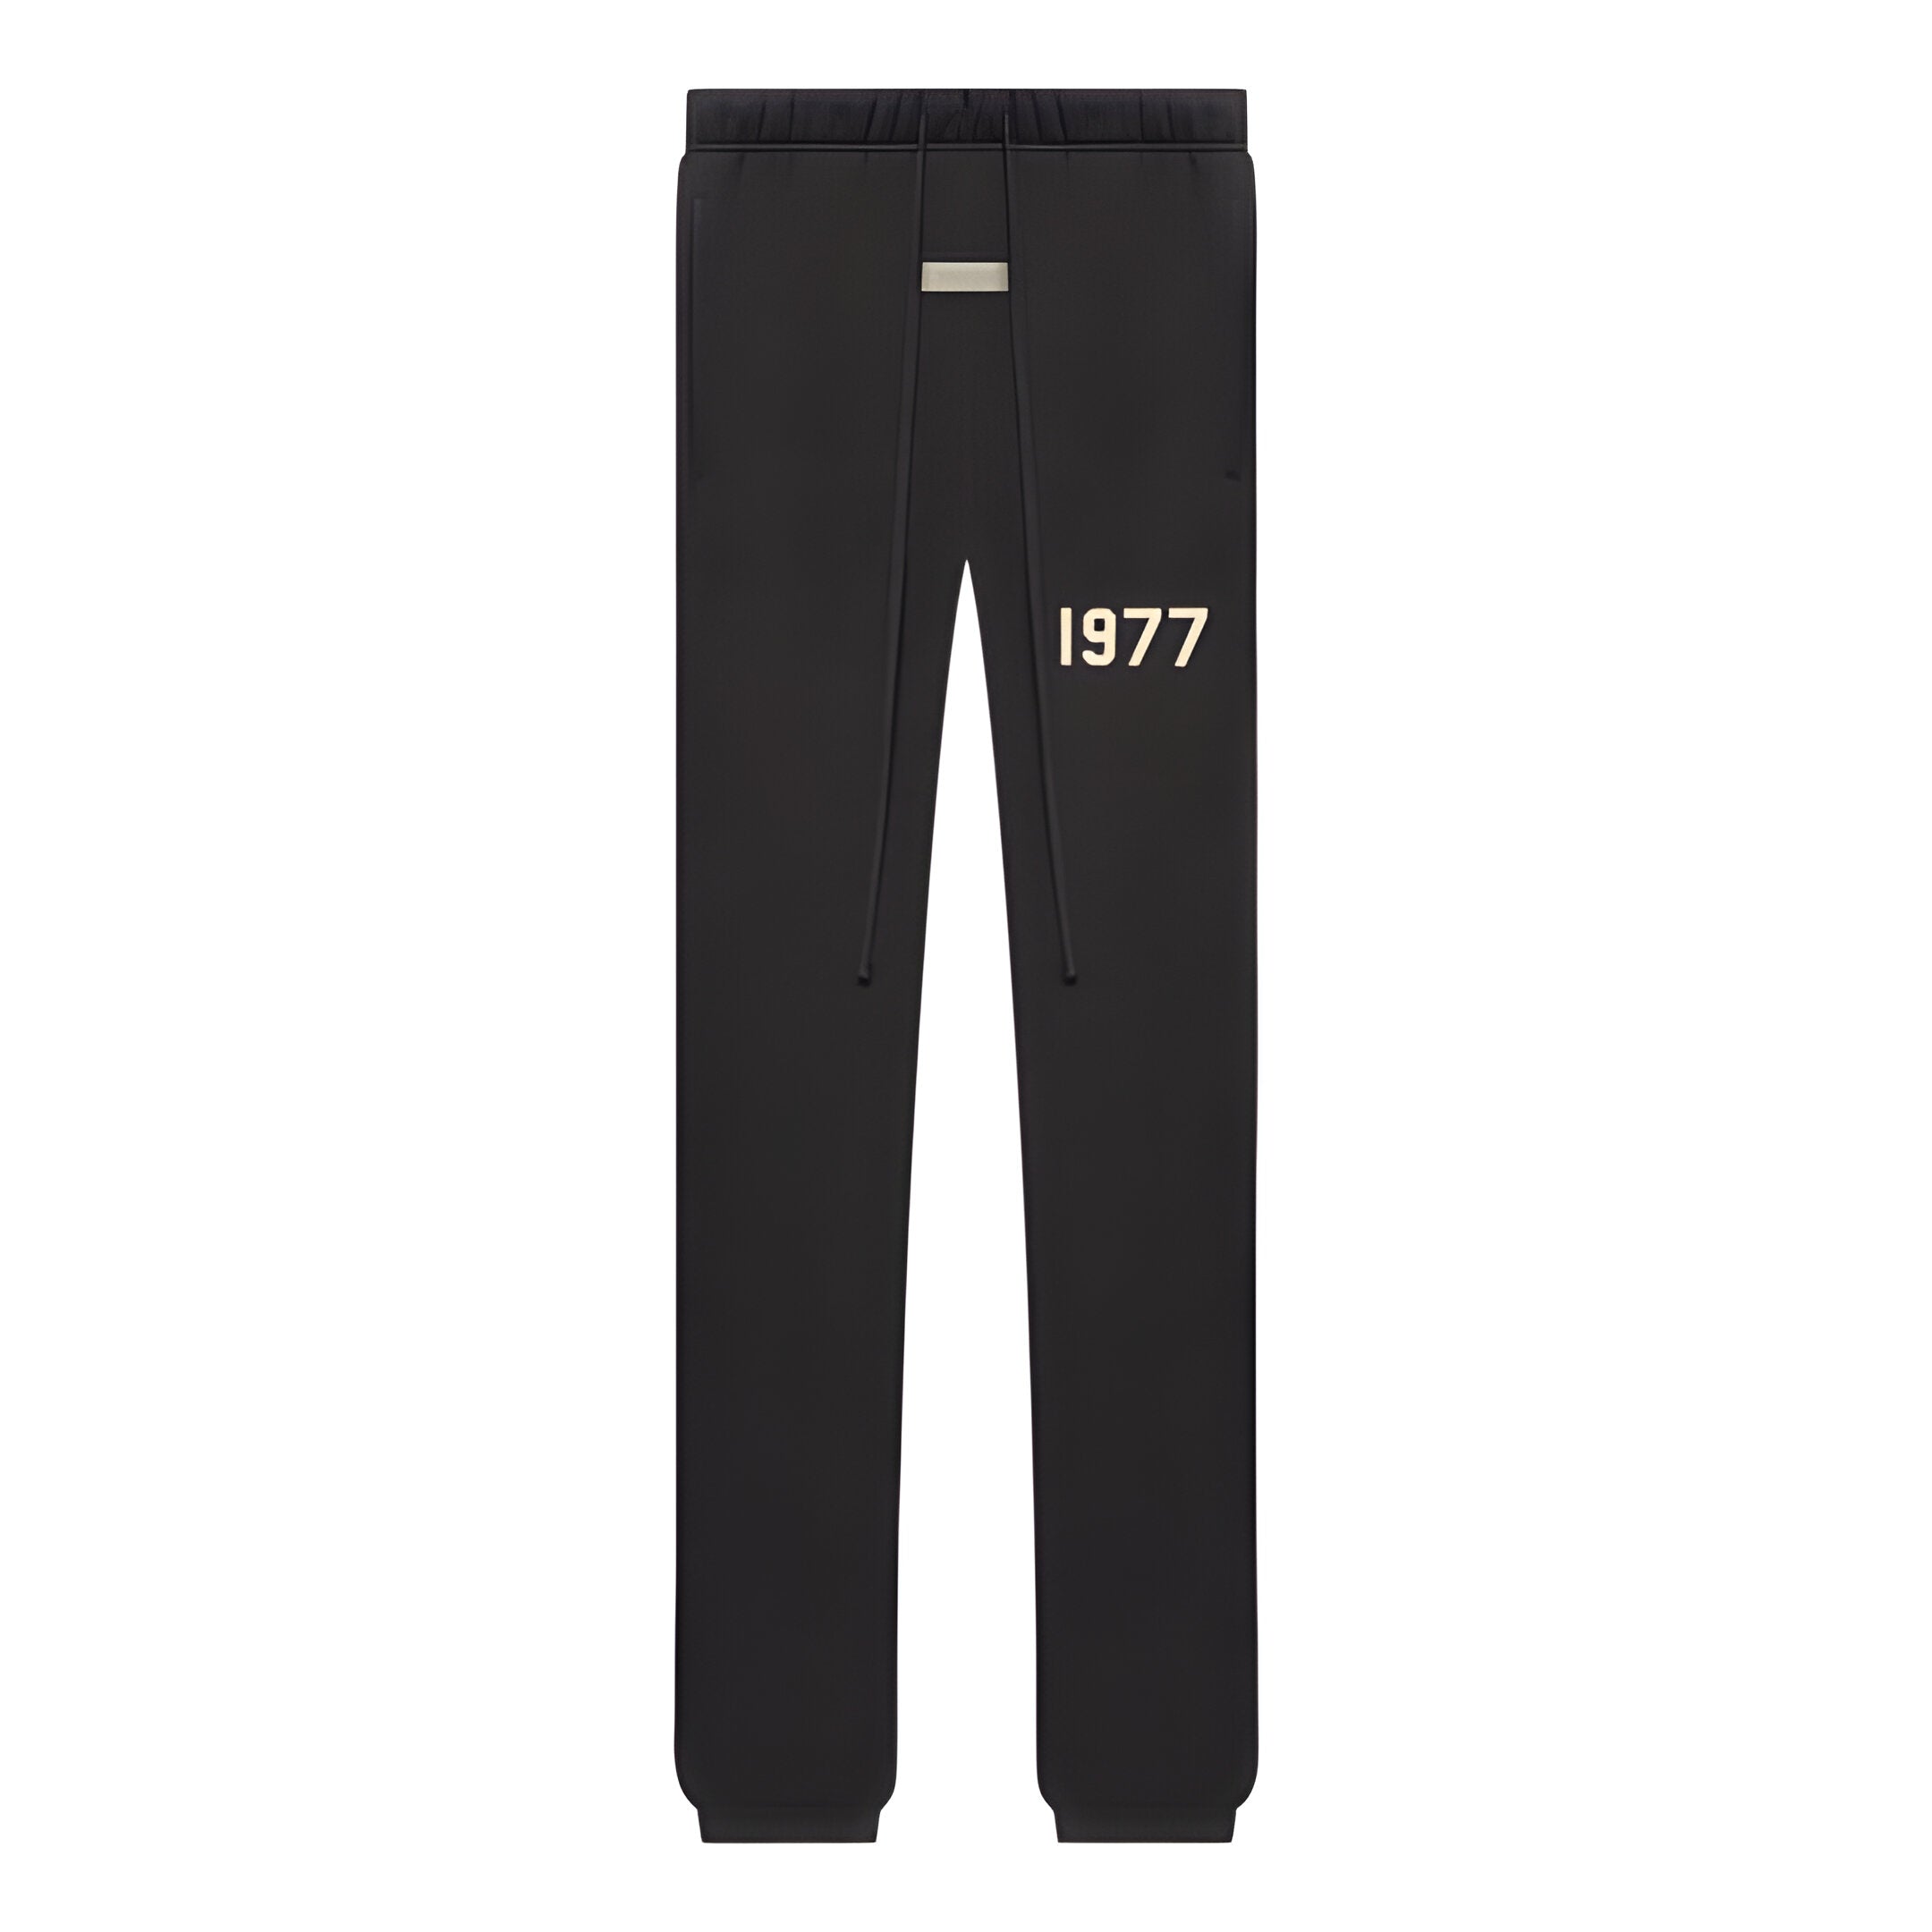 Fear of God Essentials Relaxed 1977 Sweatpants Iron